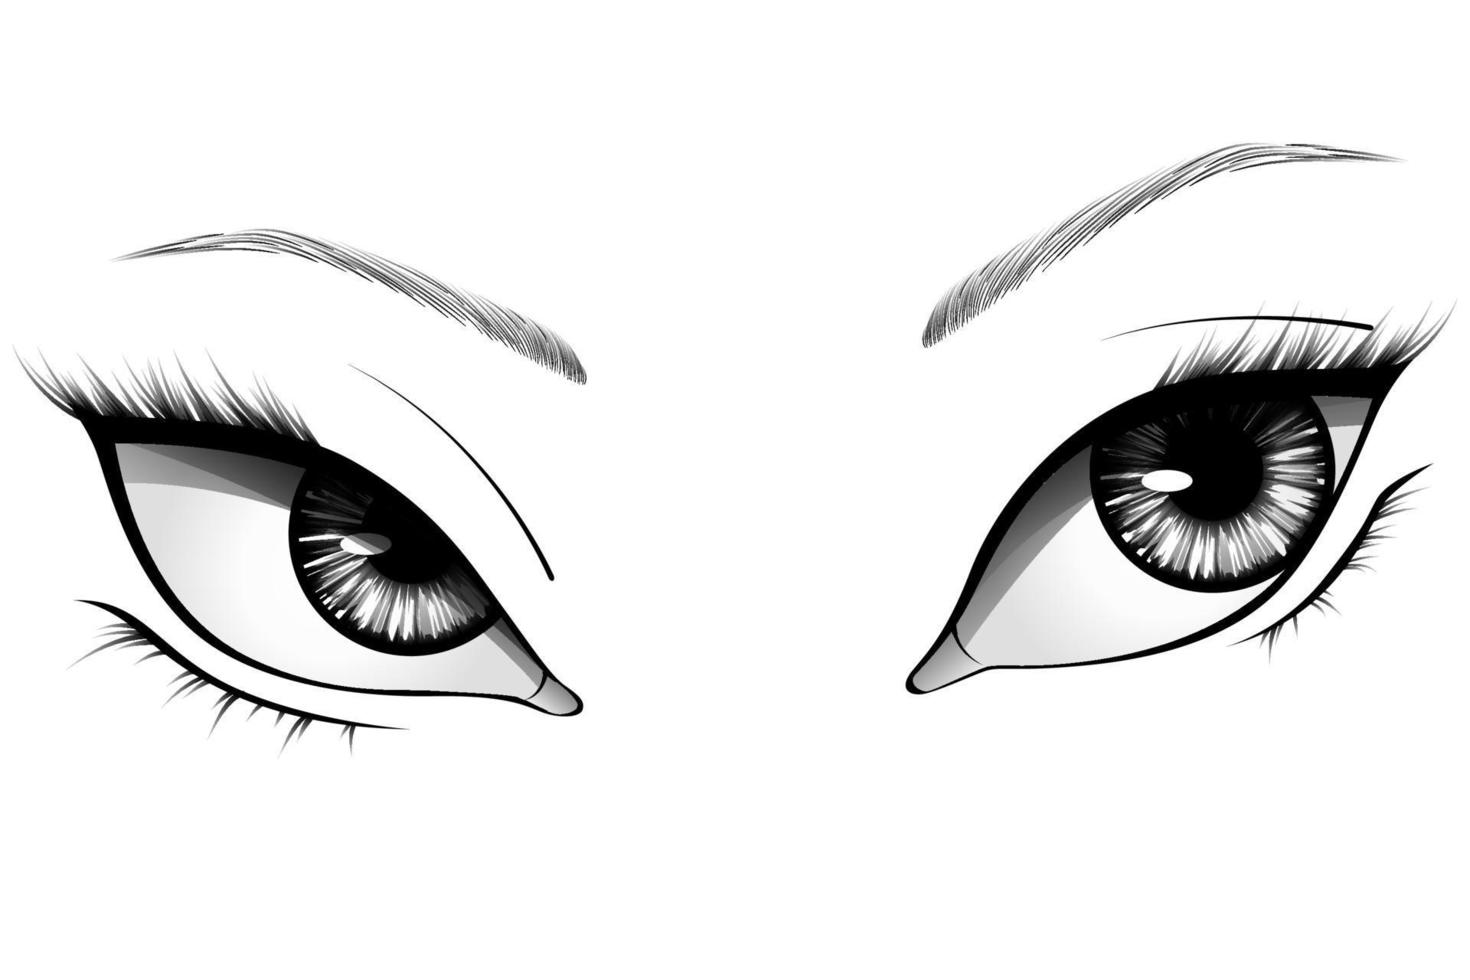 How To Draw Anime Eyes drawing image in Vector cliparts category